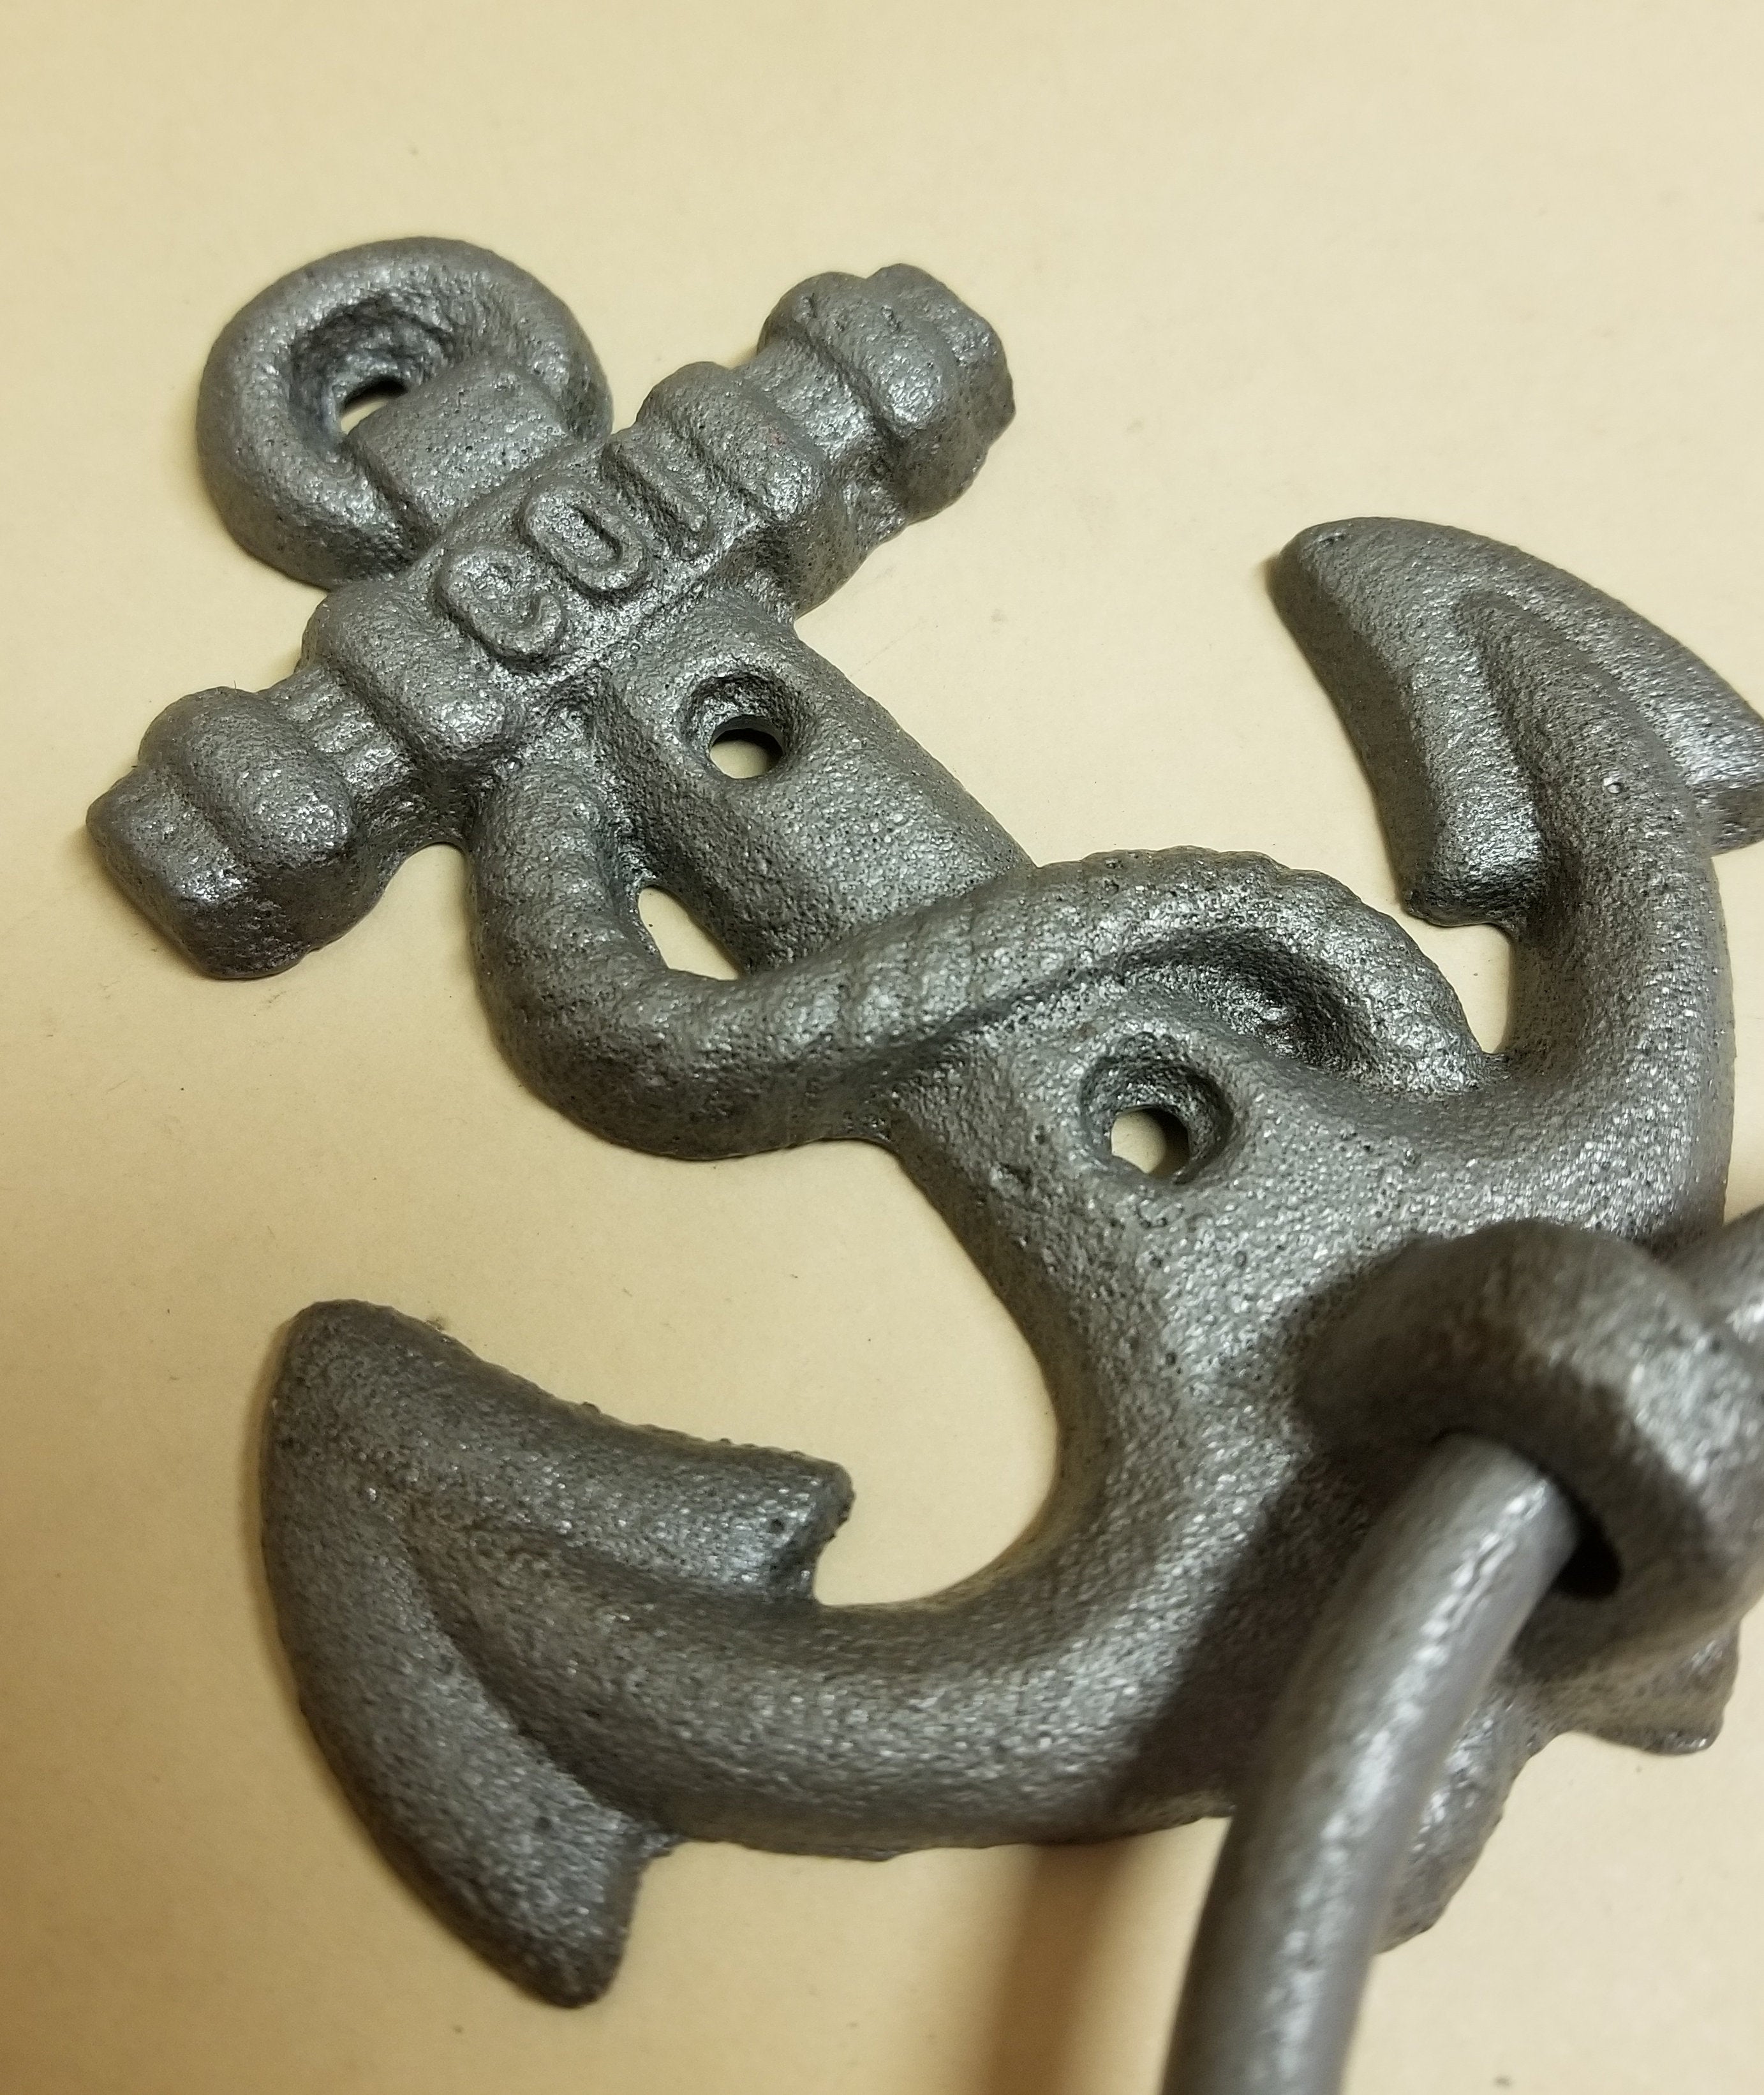 Cast Iron Anchor Towel Ring 4" Rustic Brown Wall Mount Nautical Decor bathroom accessory Carvers Olde Iron 